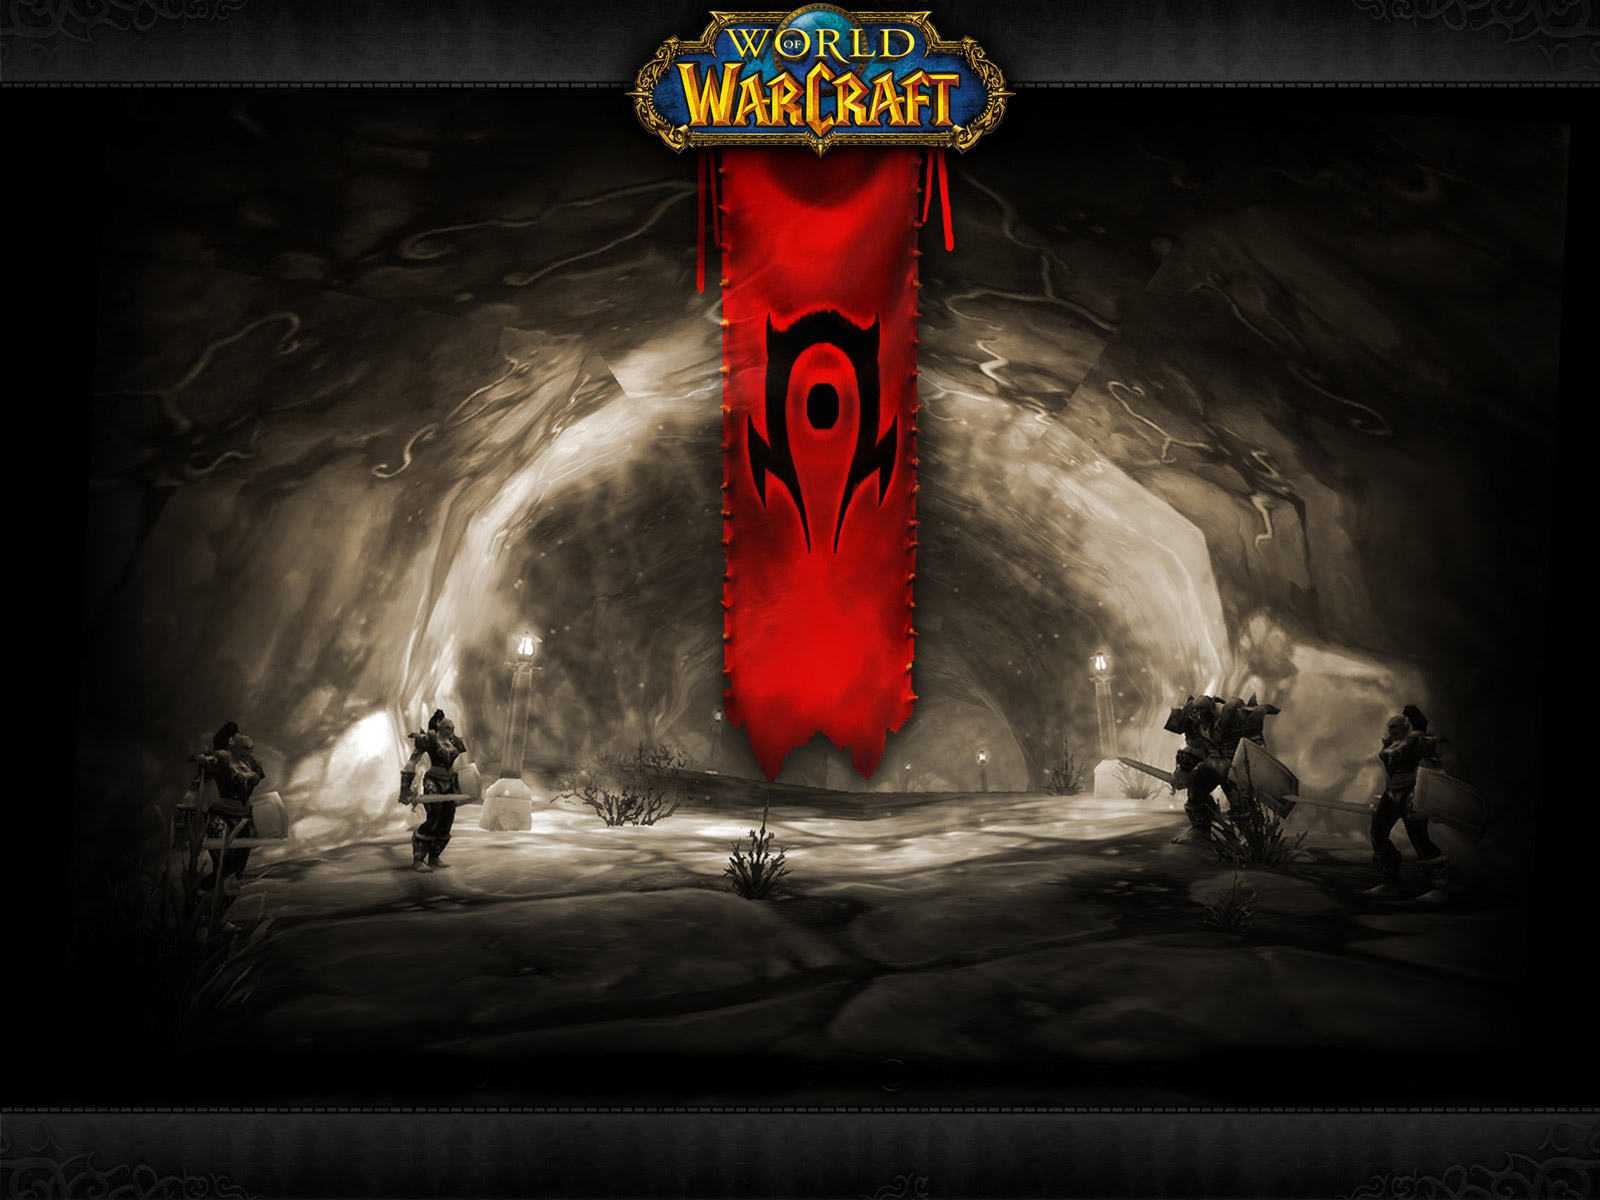 World Of Warcraft Backgrounds And Images B
wow - World Of Warcraft Classic Horde - HD Wallpaper 